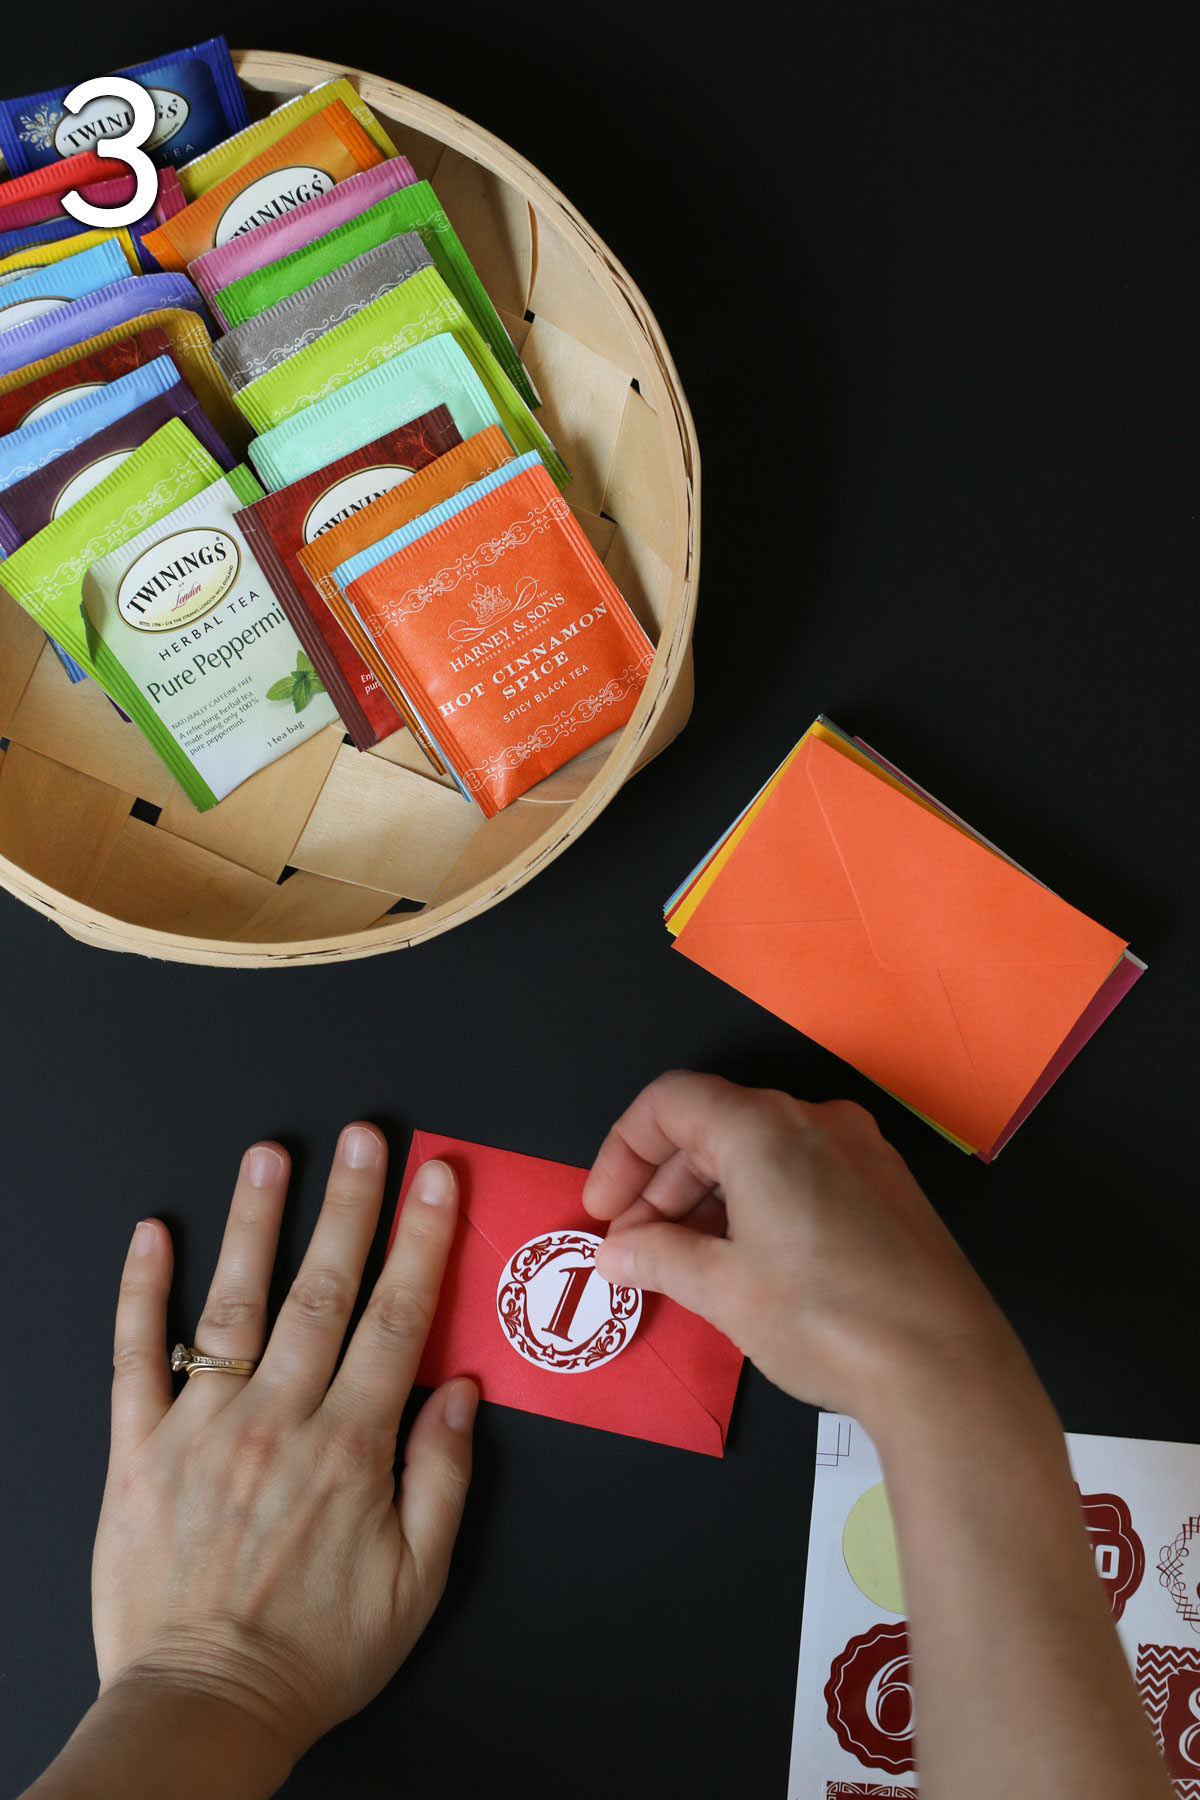 placing a number sticker on the red envelope with the other stickers, envelopes, and tea on the table nearby.